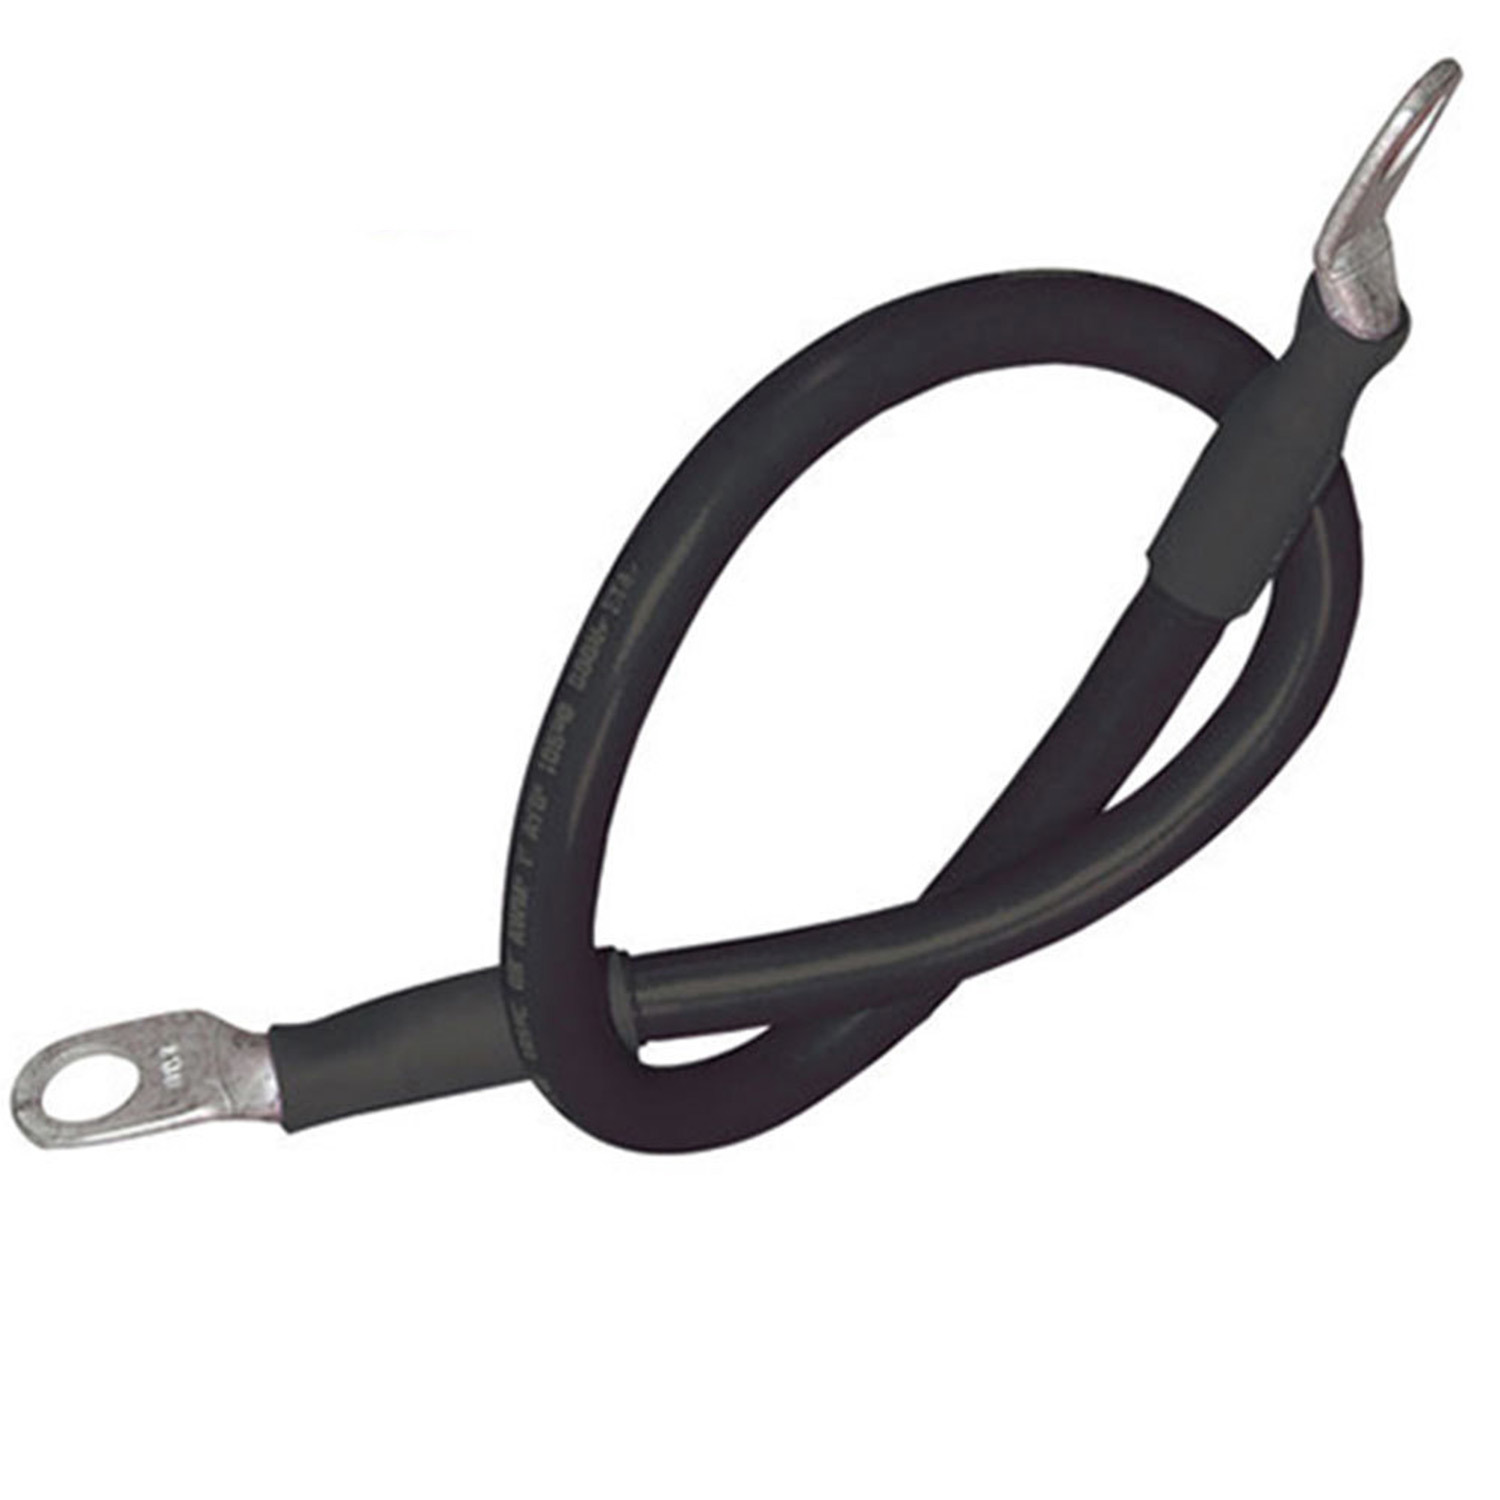 4 AWG Battery Cable Black, 24 Inches SeaFit 